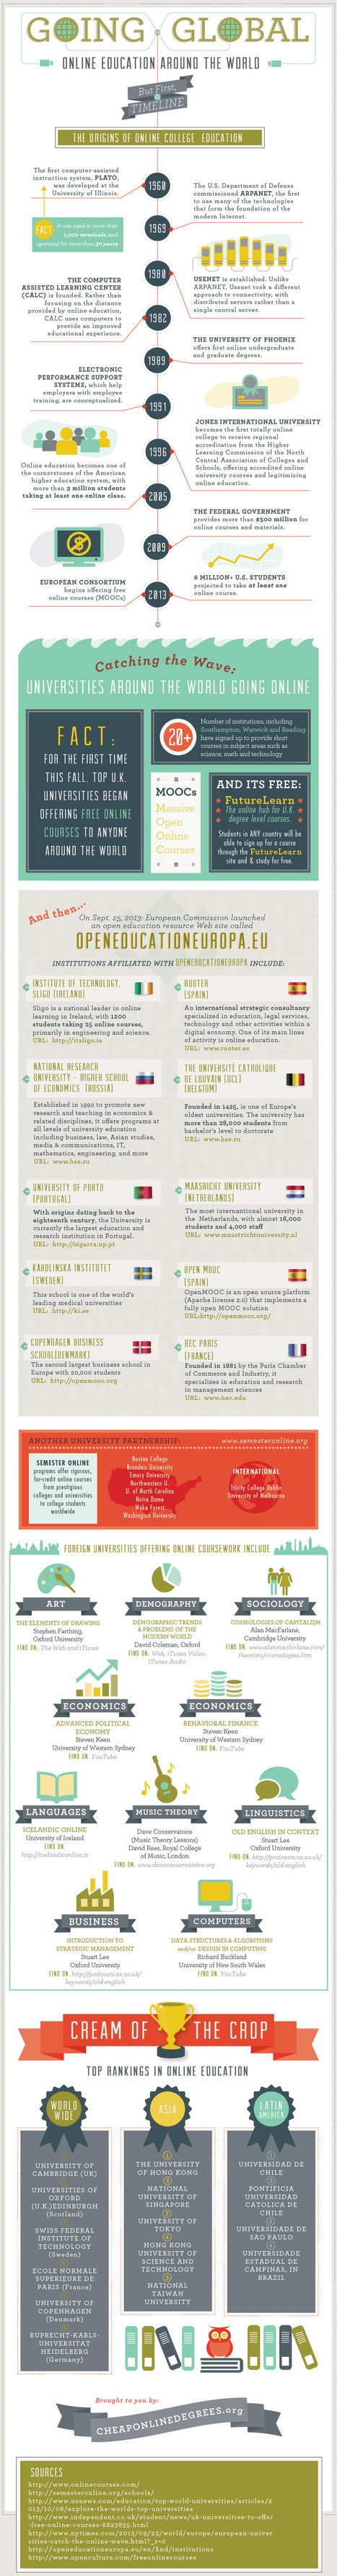 Infographic: Online Education Around the World | Communicate...and how! | Scoop.it